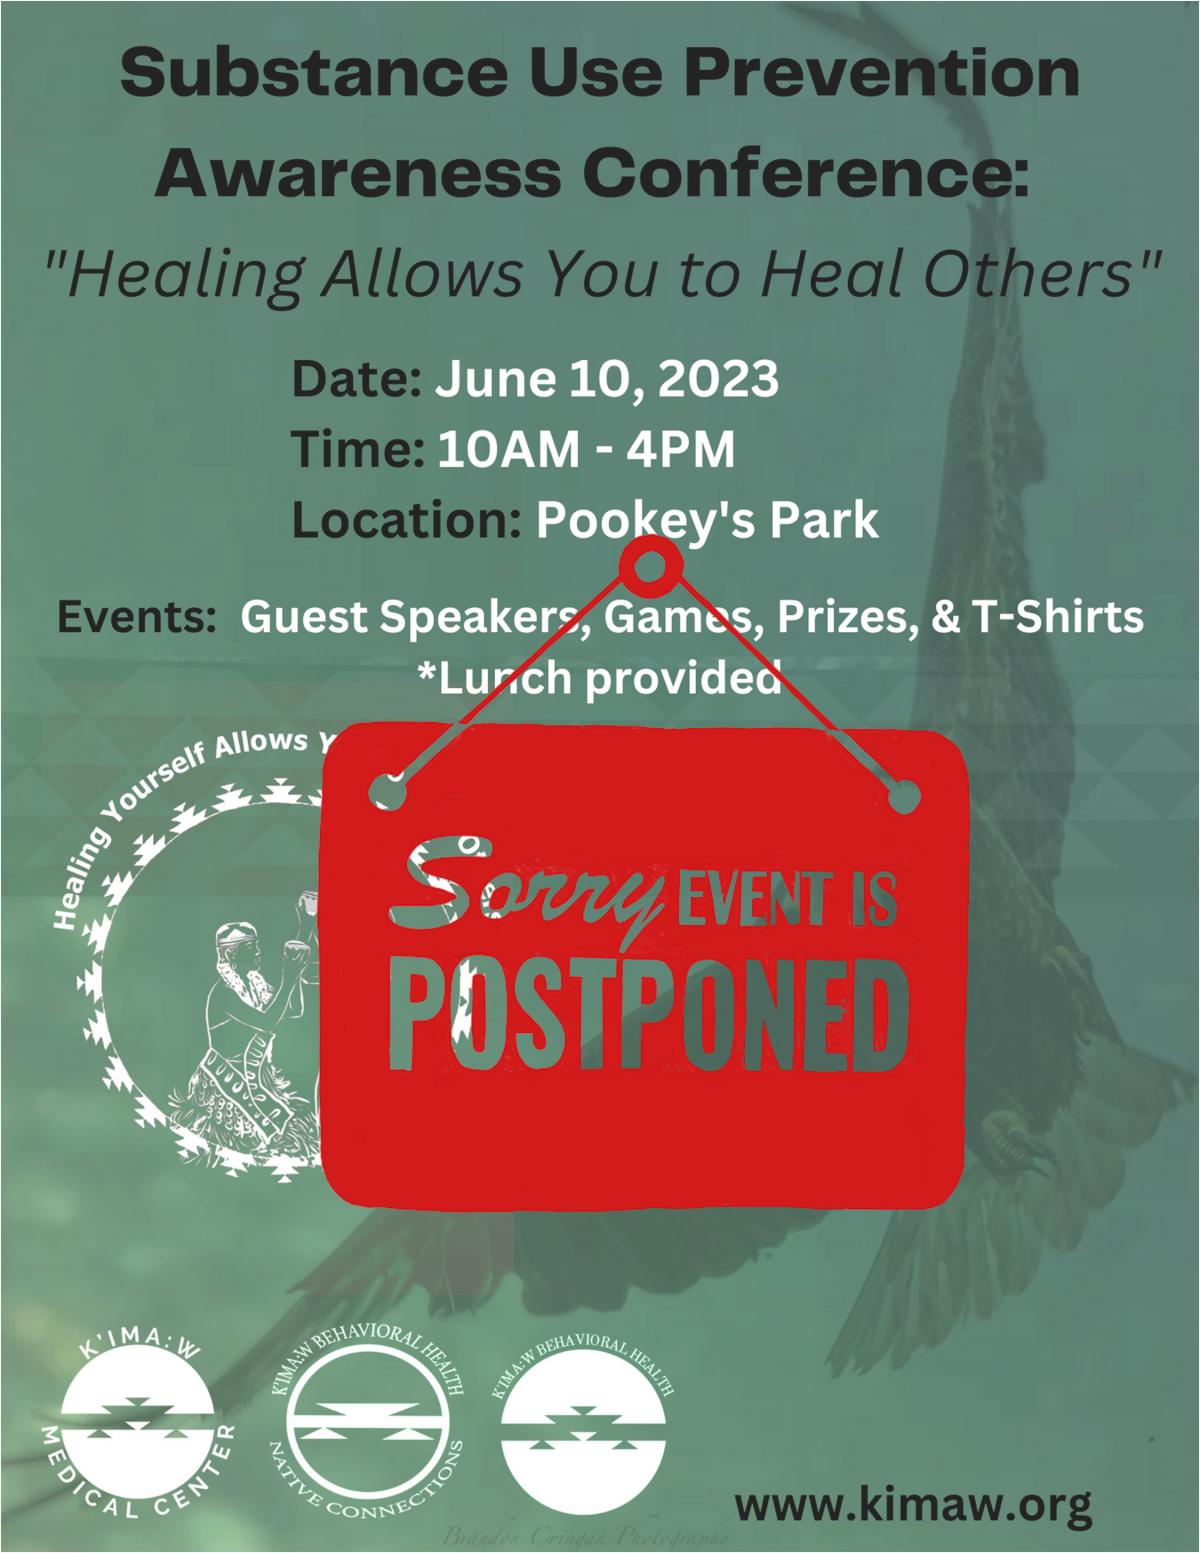 Native Connections Substance Use Prevention Awareness Conference: June 10, 2023 Postponed